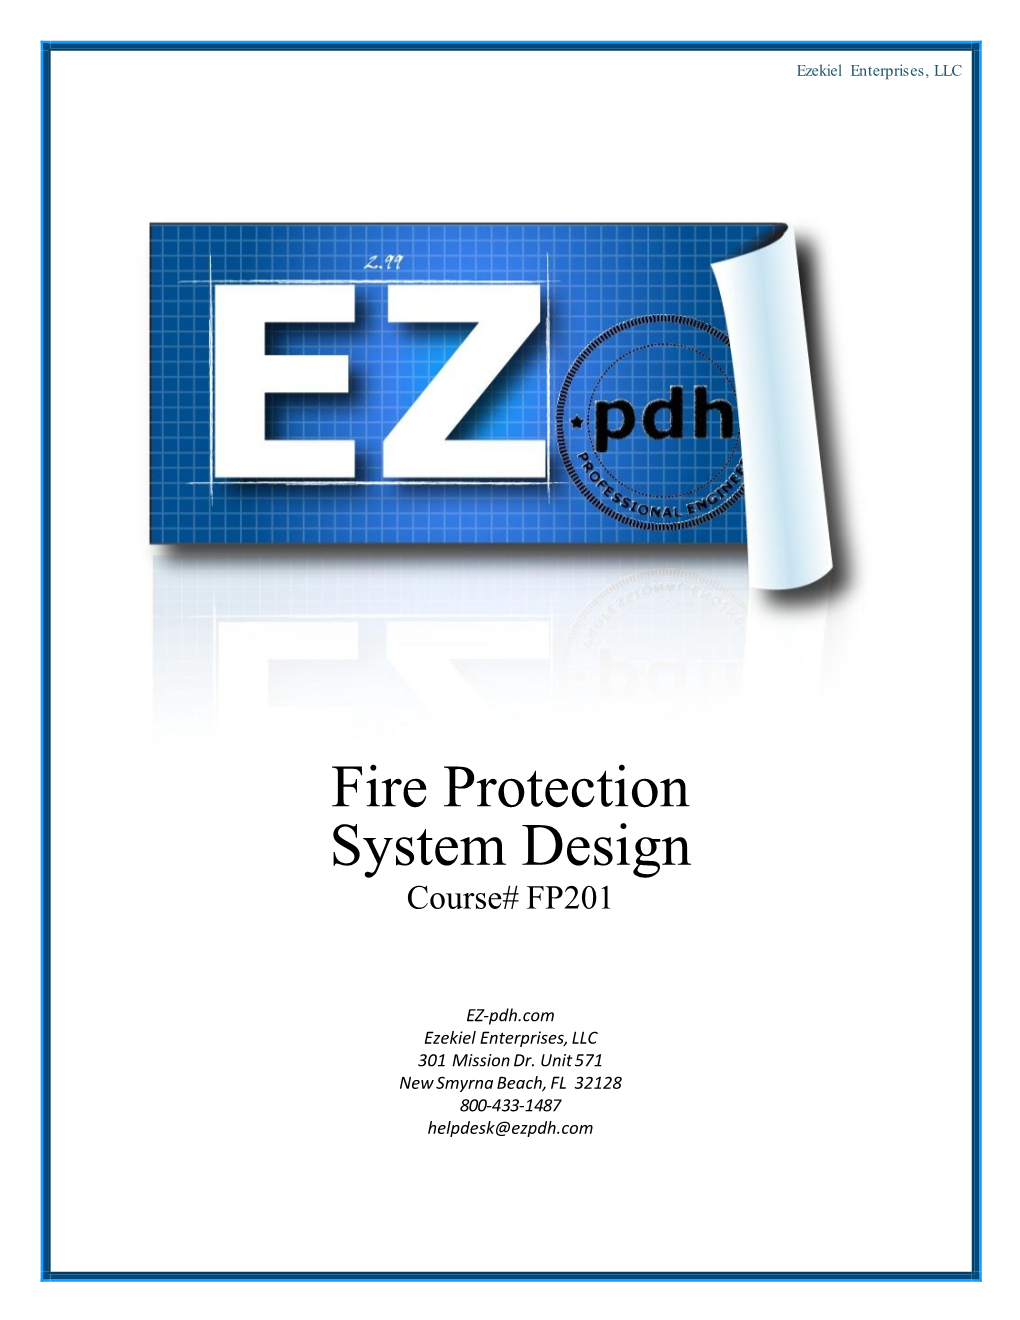 Fire Protection System Design Course# FP201